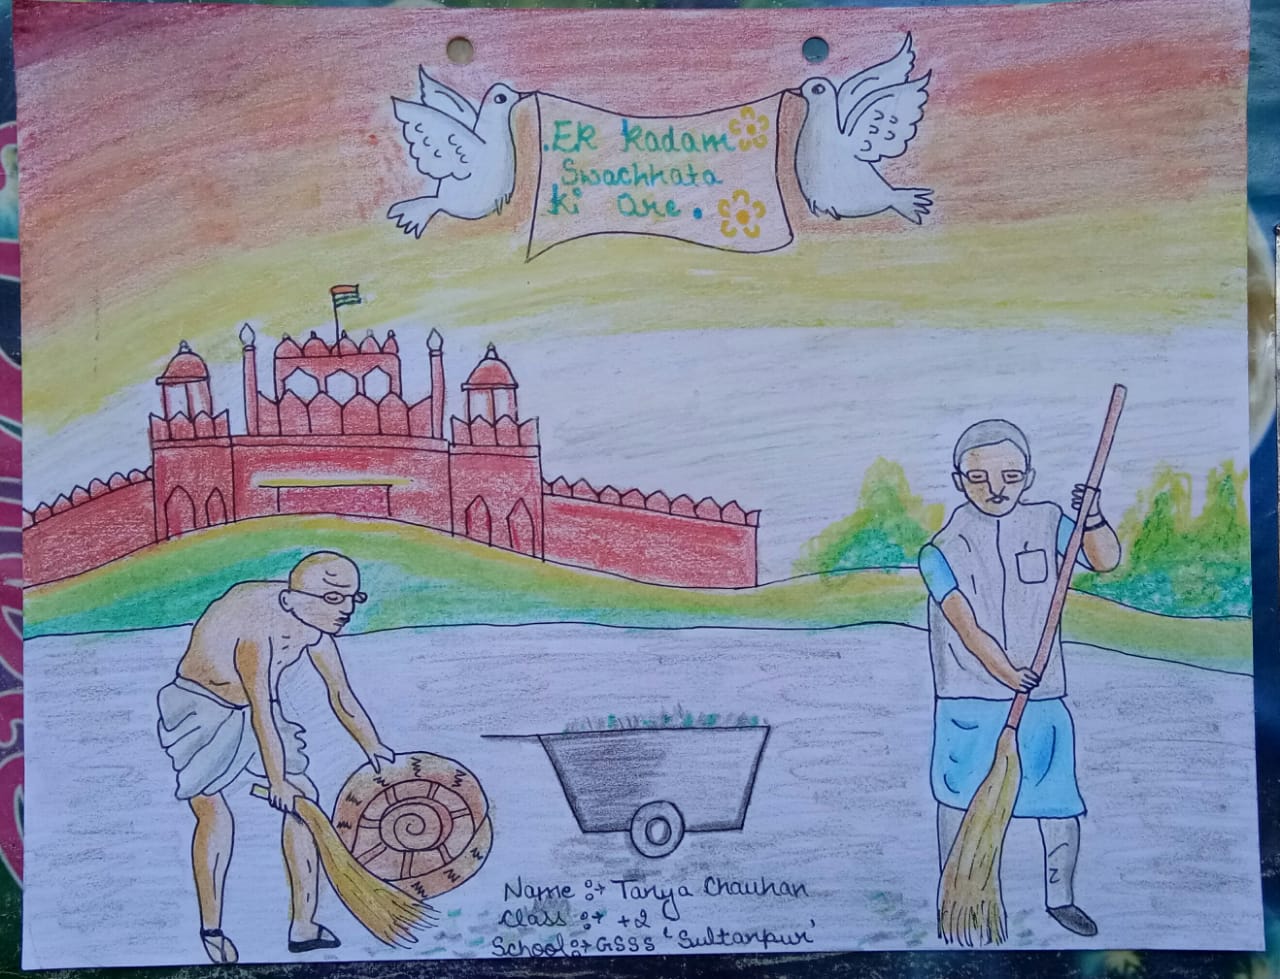 Swachh bharat swasth bharat drawing - Brainly.in